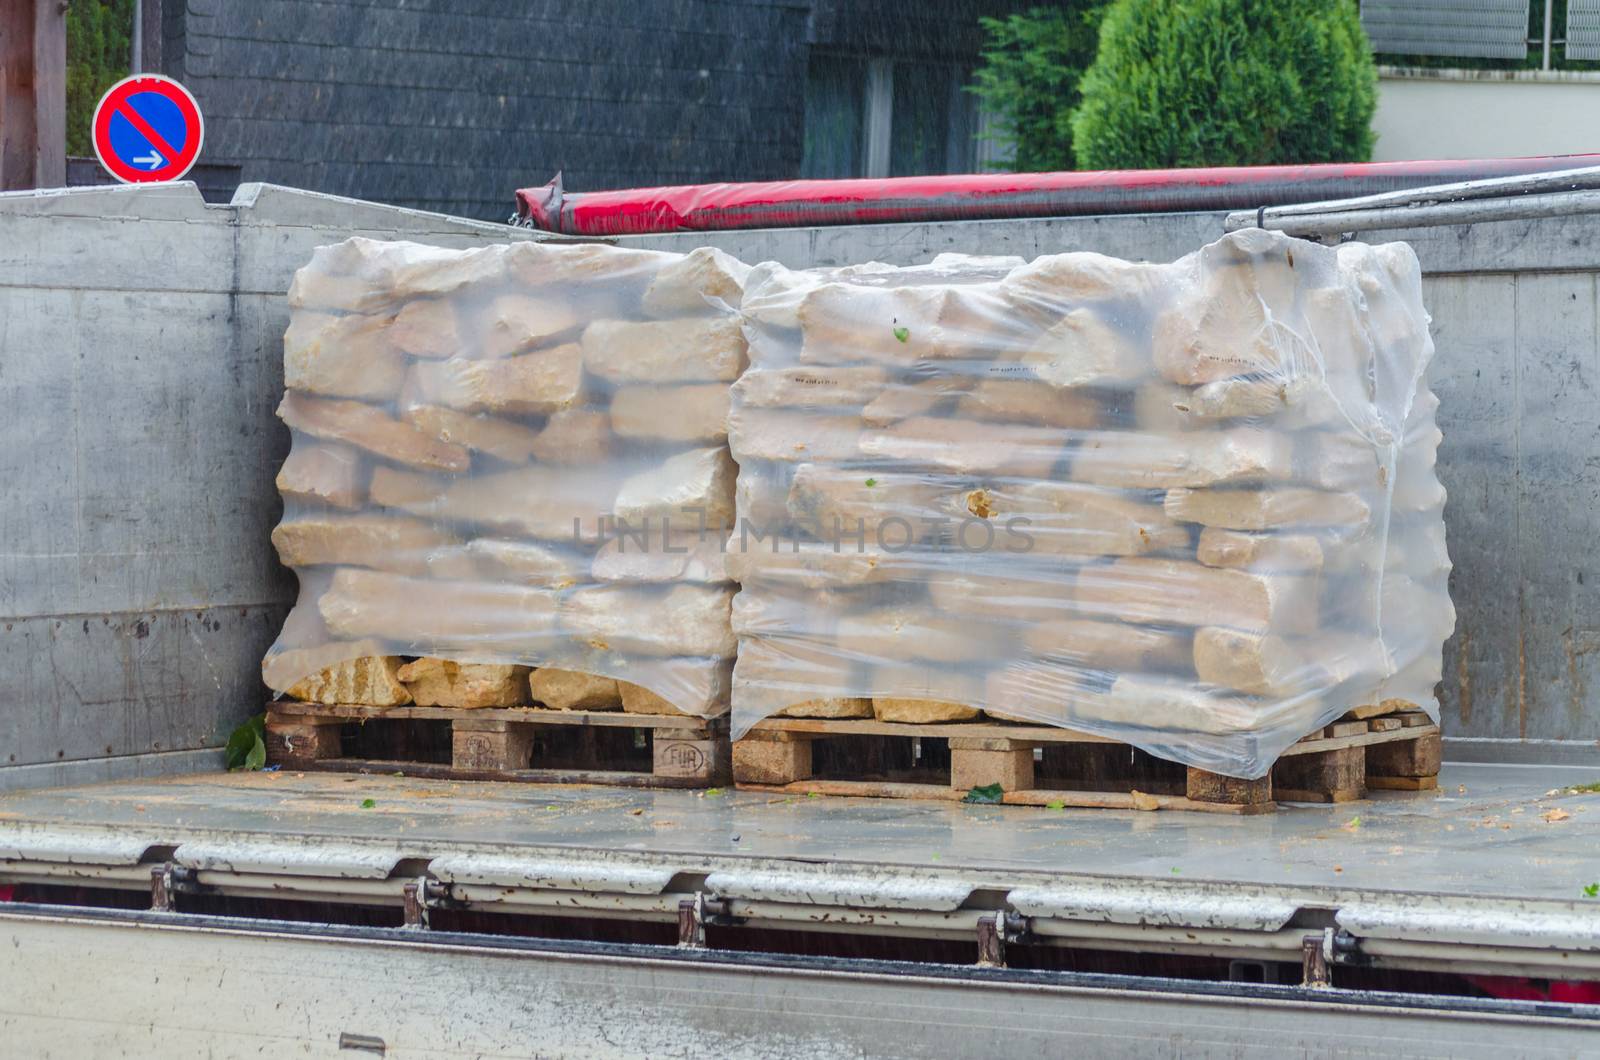 Pallets with sandstones are delivered and unloaded from a truck.